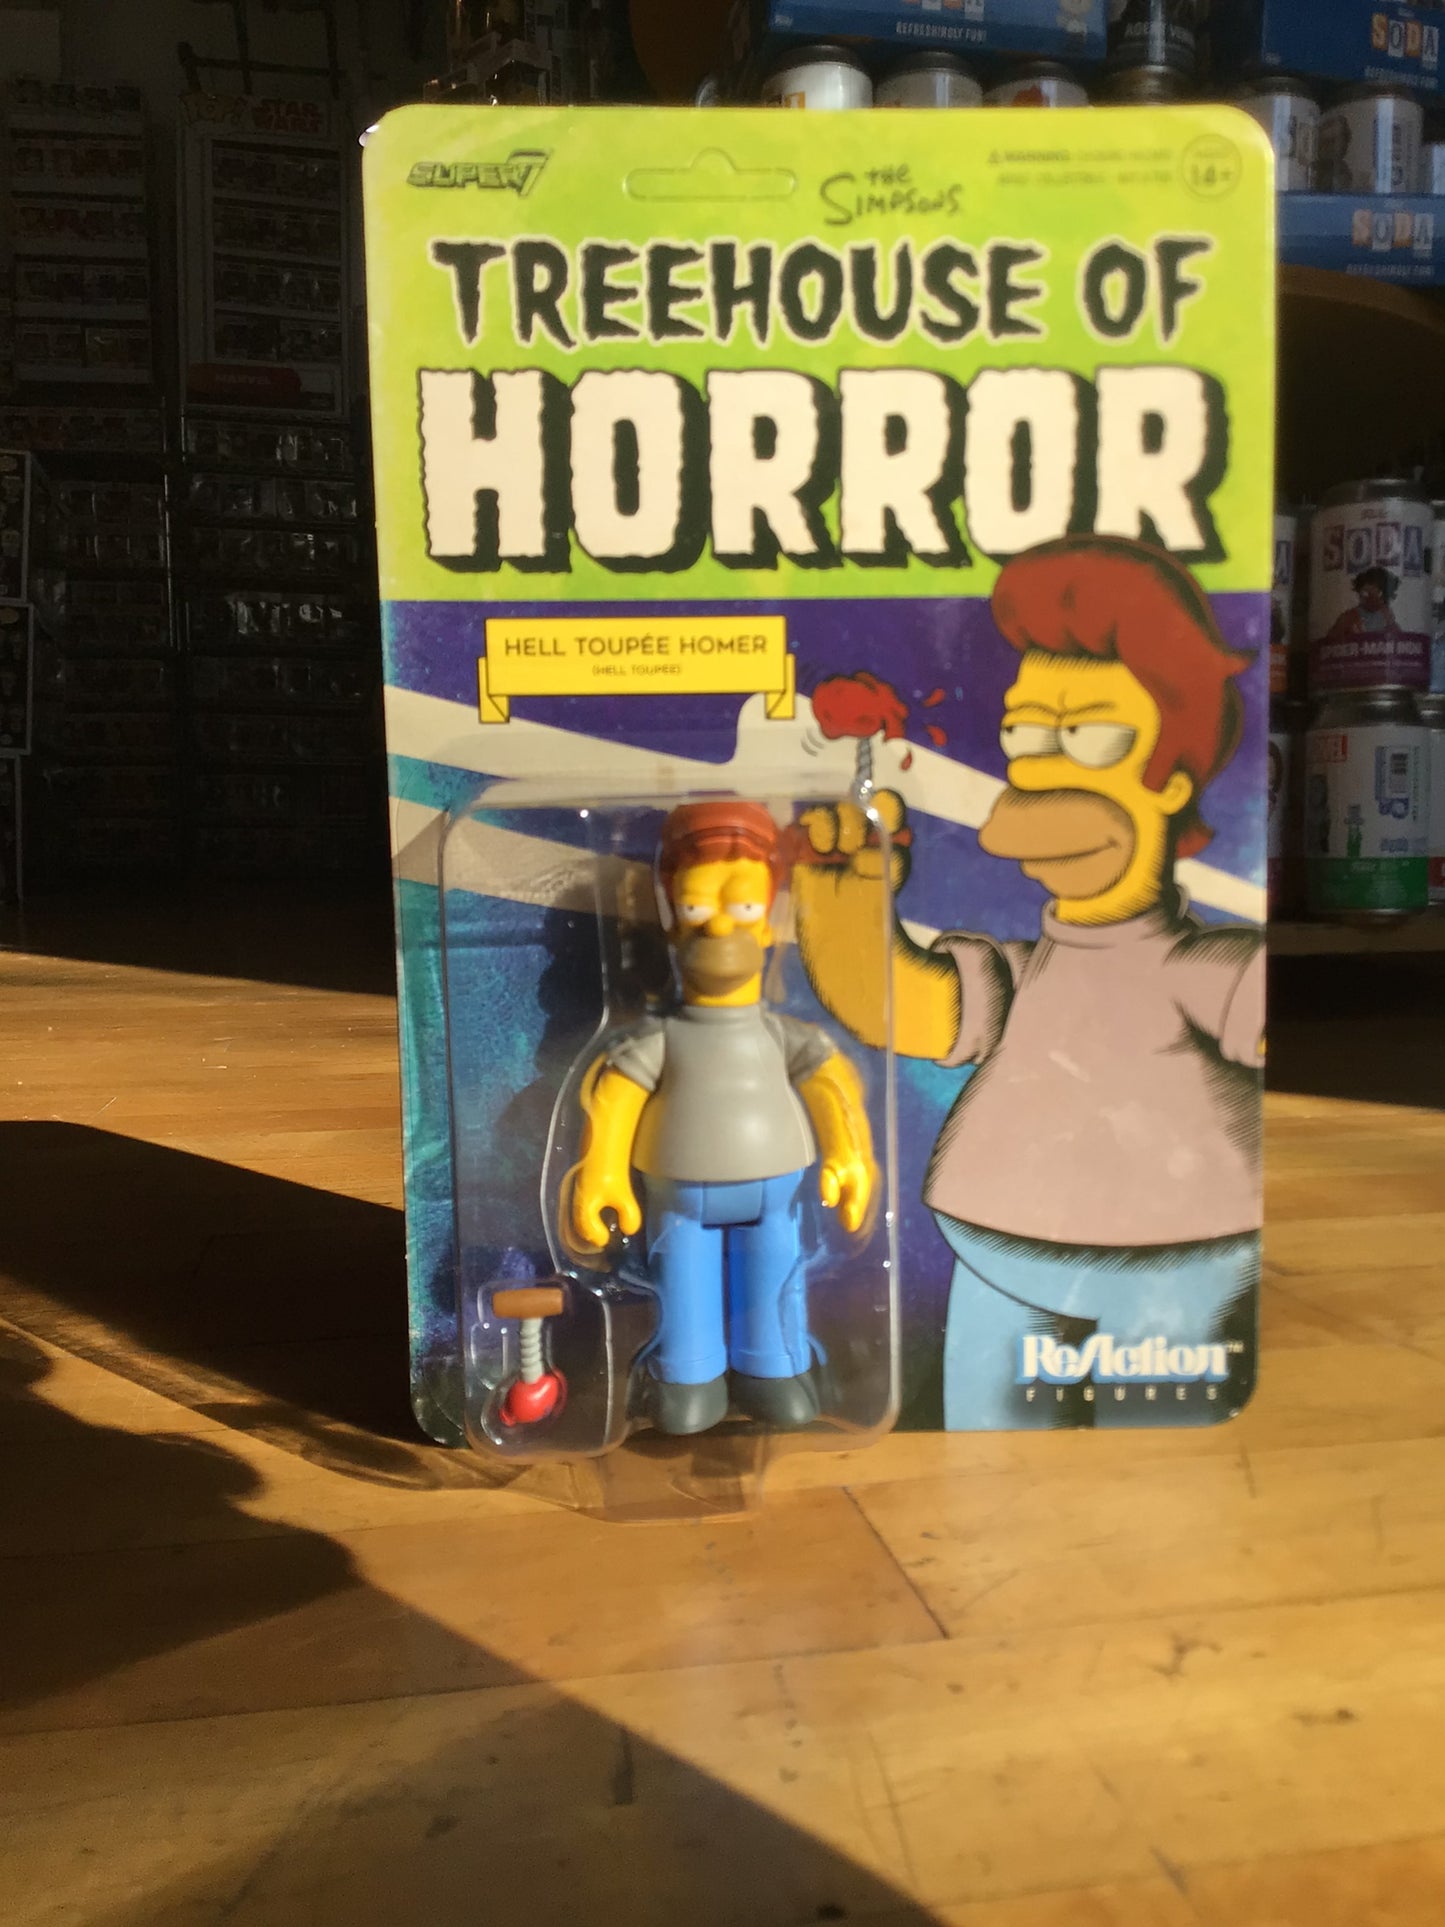 Treehouse of Horror- The Simpsons -Hell Toupée Homer Super 7